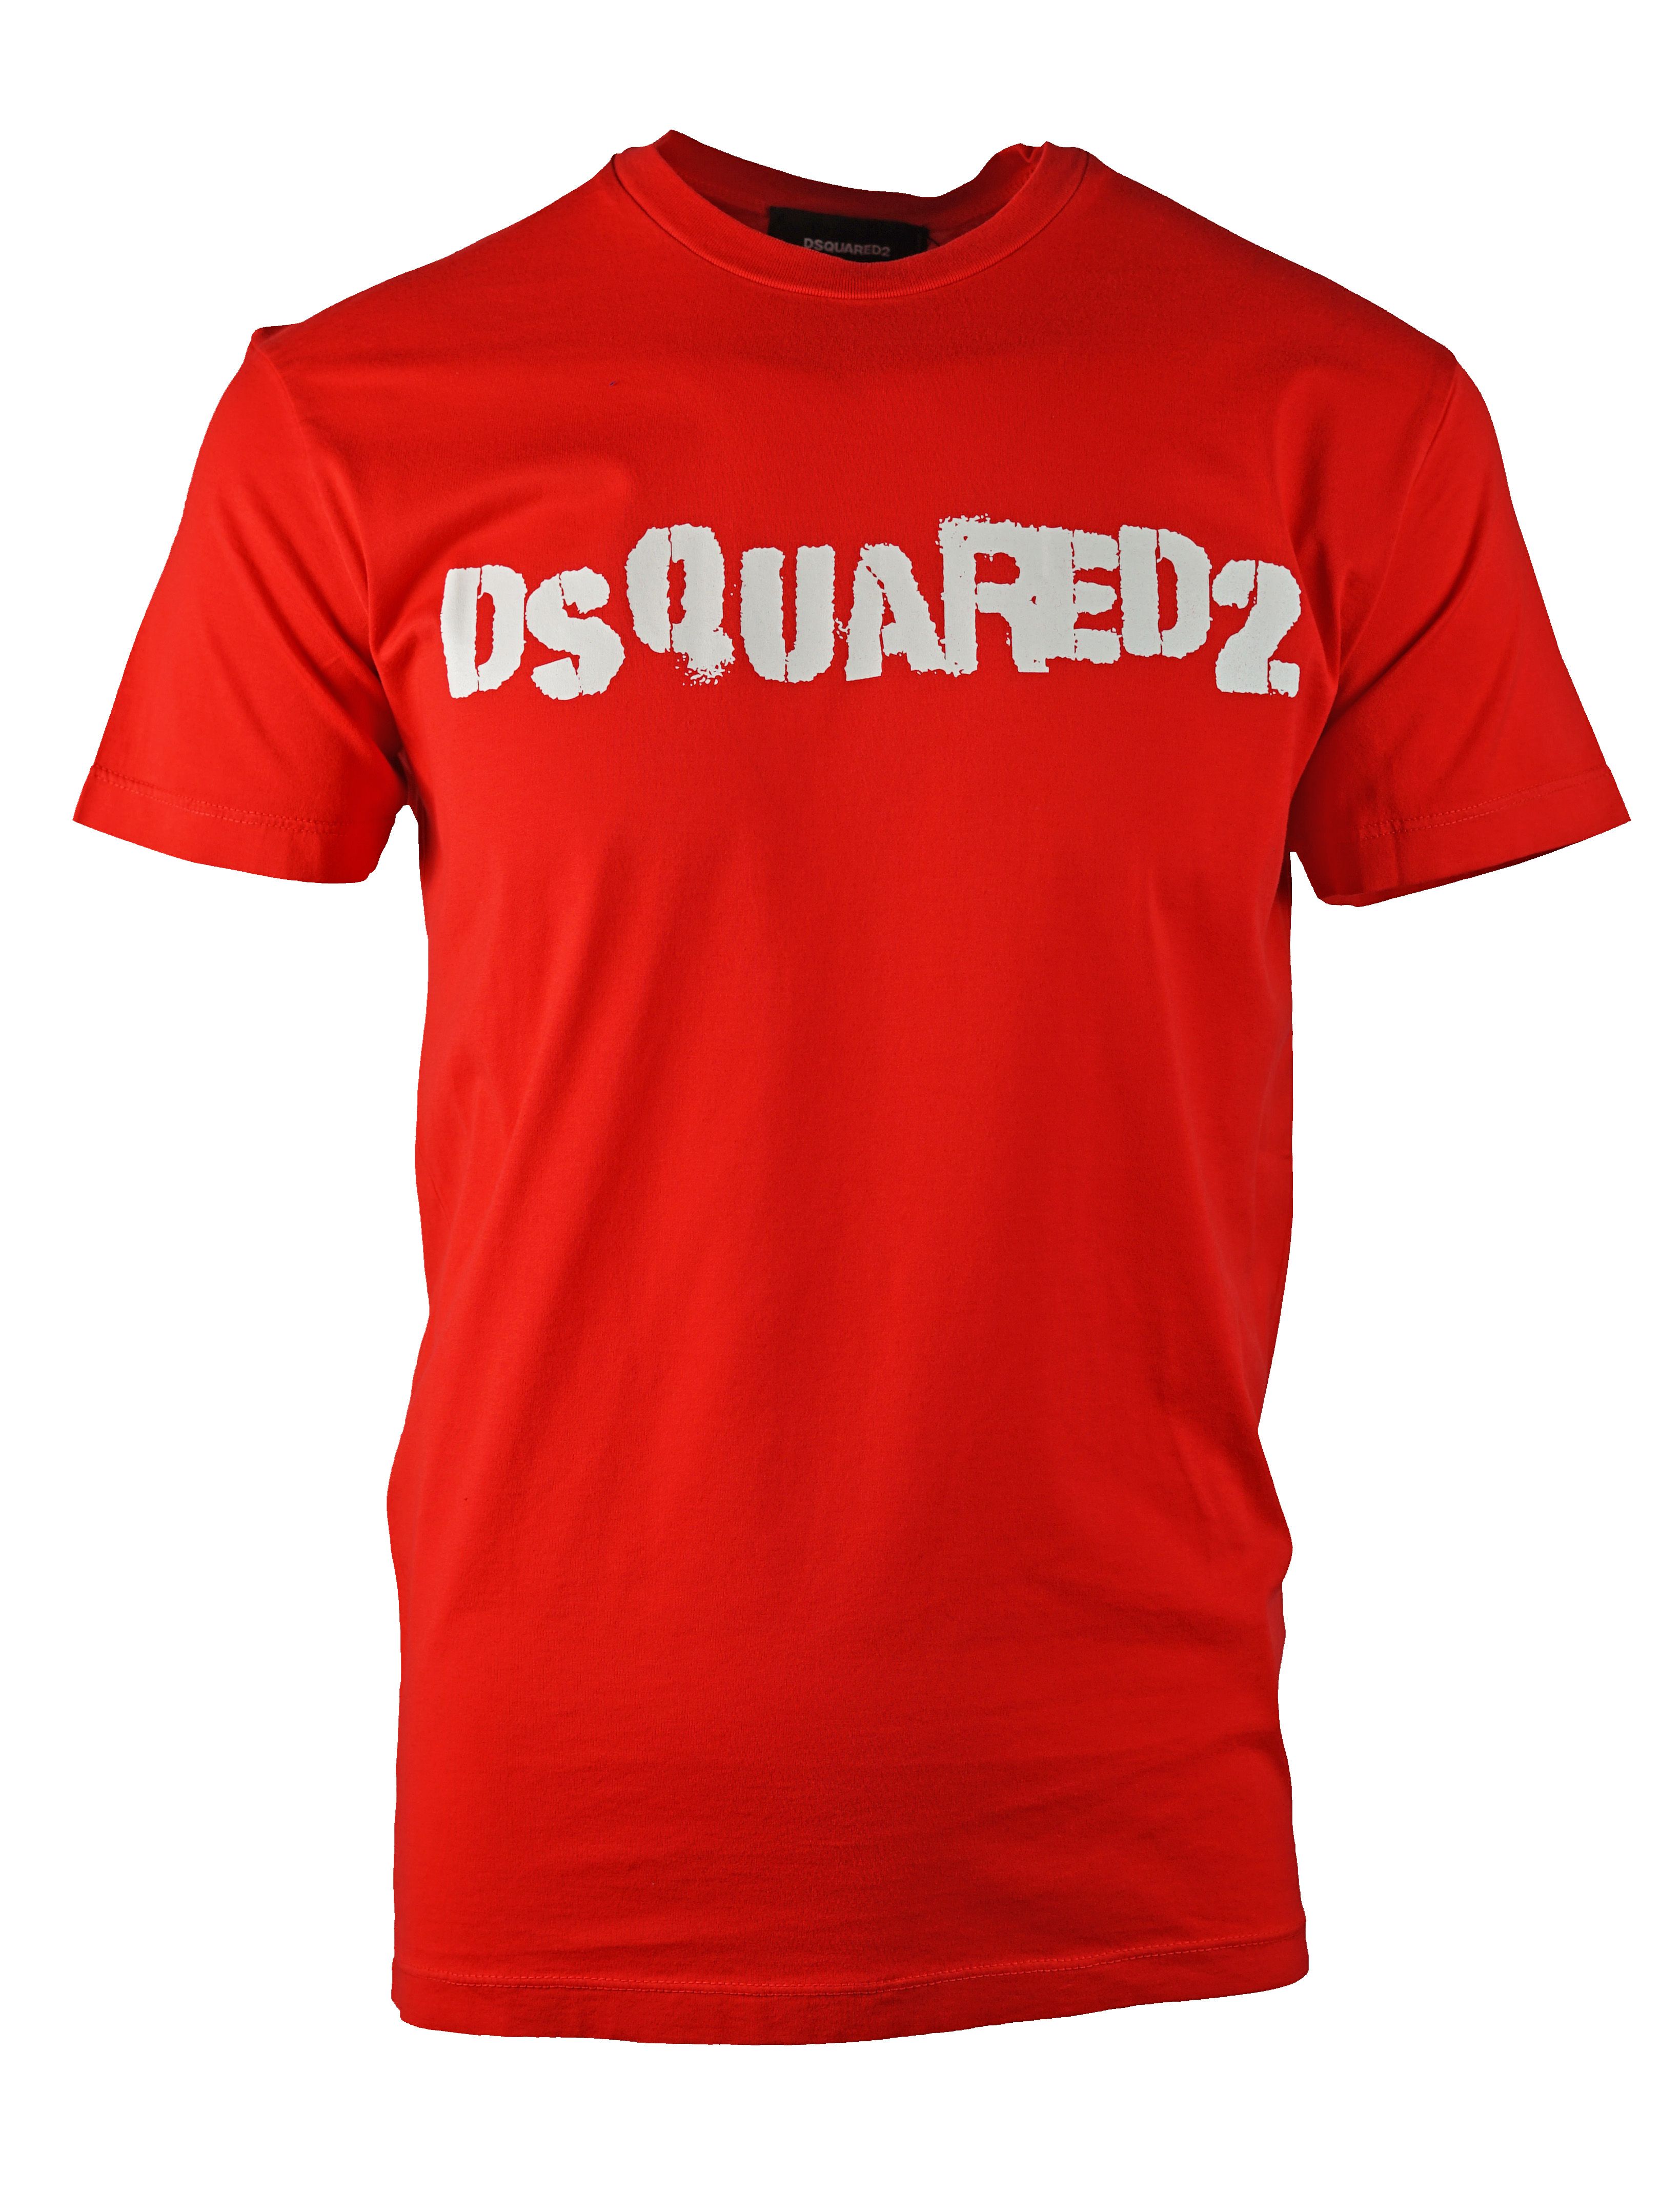 DSquared2 S74GD0494 S22427 304 T-Shirt. Round Crew Neck Tee. 100% Cotton. Short Sleeves. Large Branded Print On The Front. Ribbed Neck and Sleeve Endings